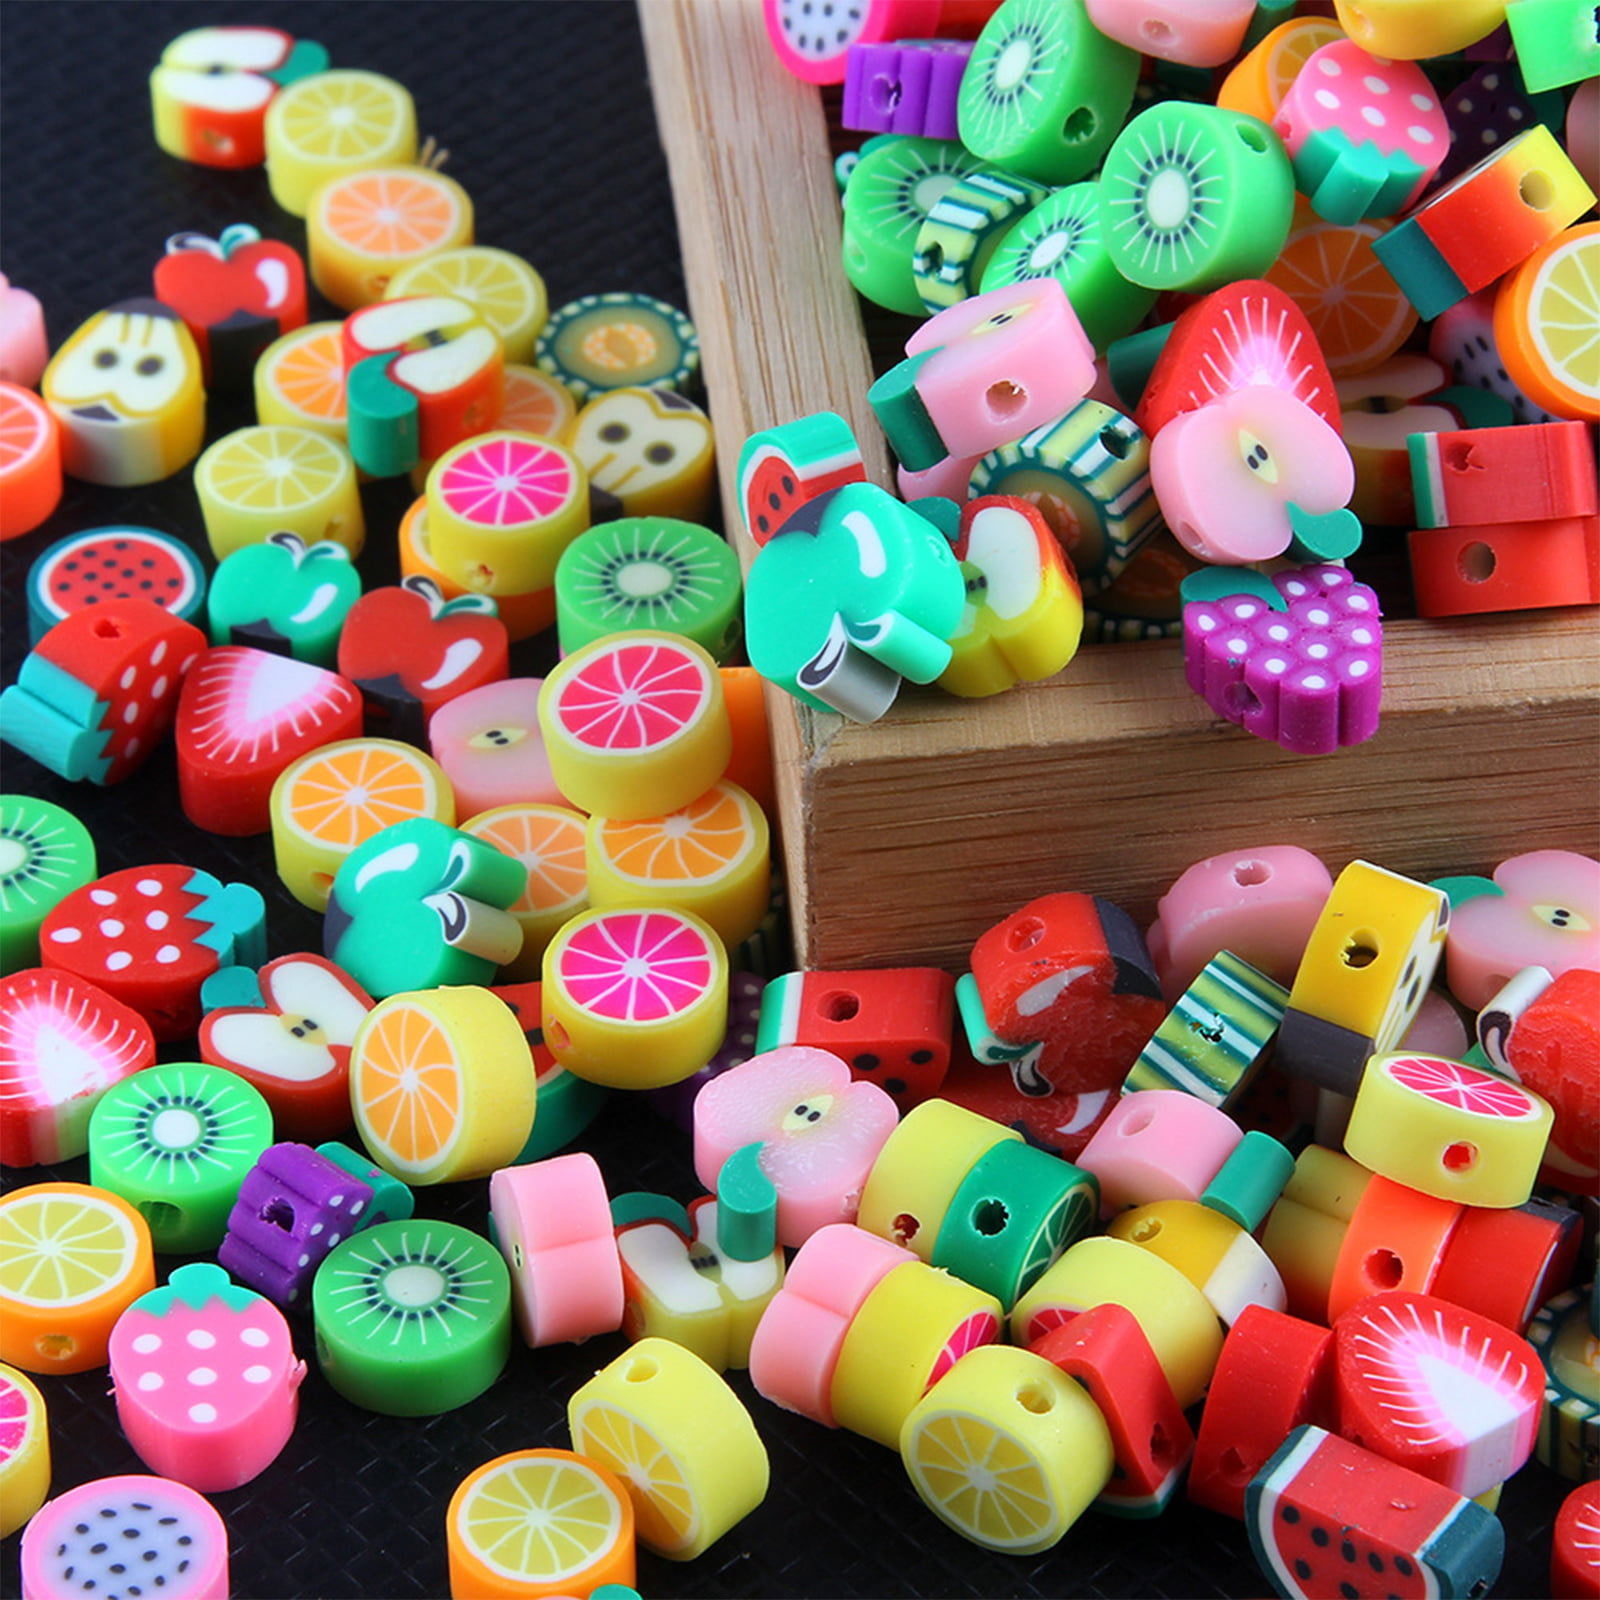 200pcs Mixed Fruit Spacer Beads Smile Face Beads Color Polymer Clay Beads,  for DIY Jewelry Bracelet Earring Necklace Craft Making Supplies